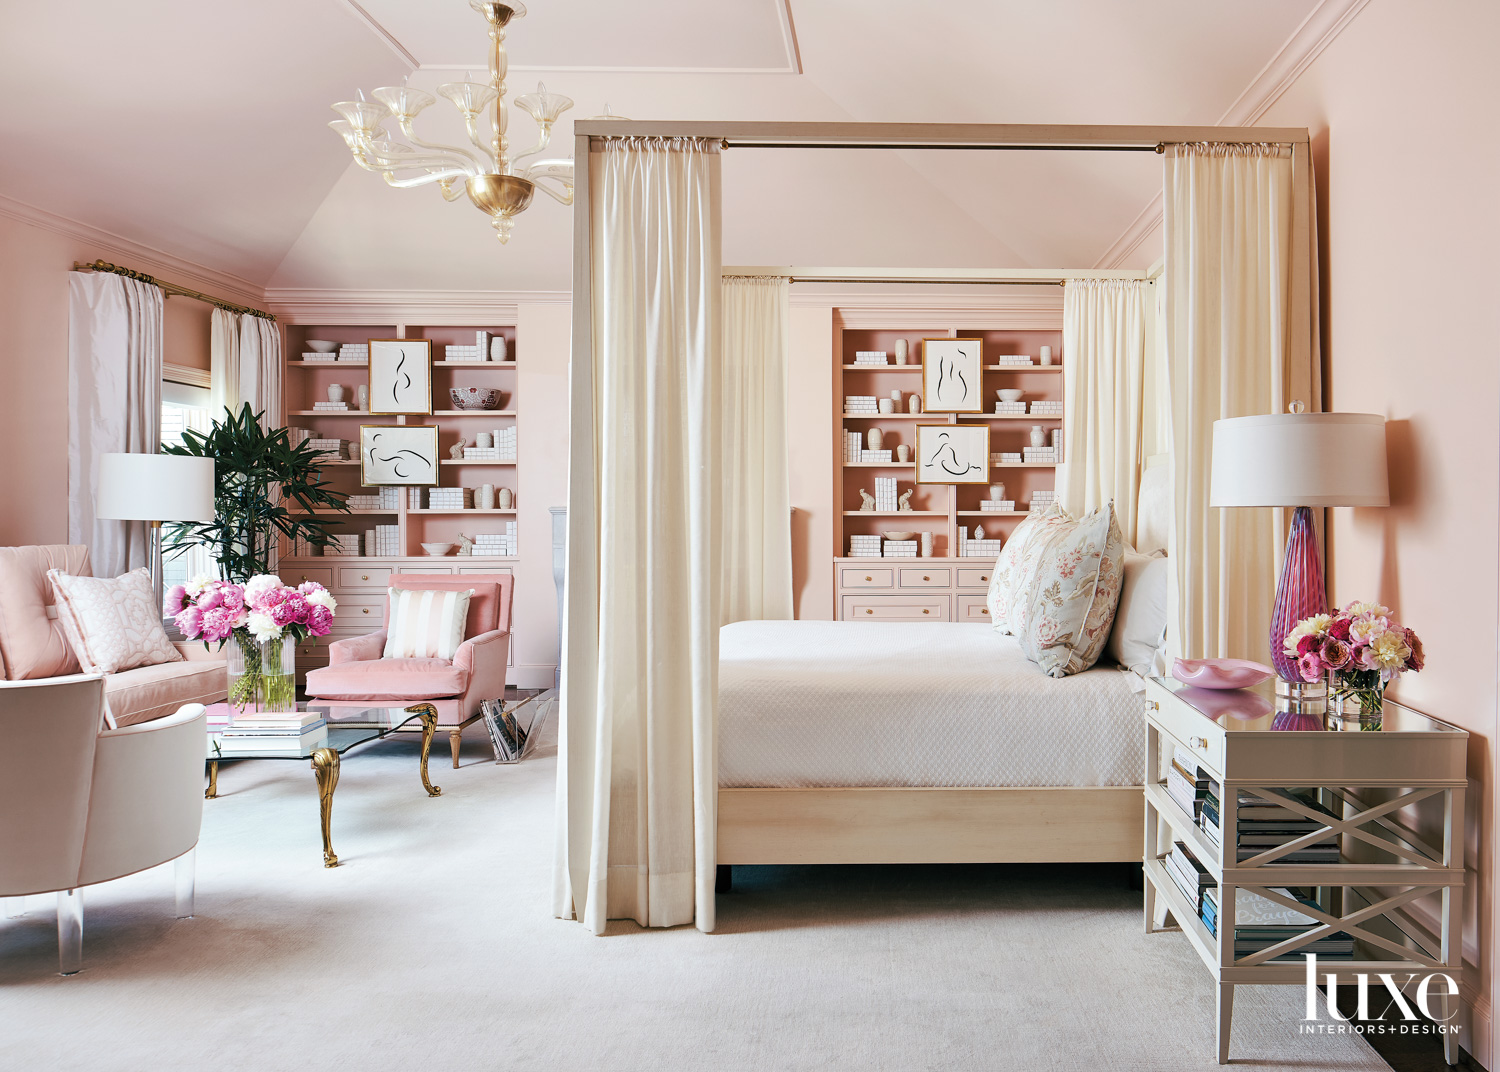 Barbiecore interior design bedroom with pale pink walls and bookshelves